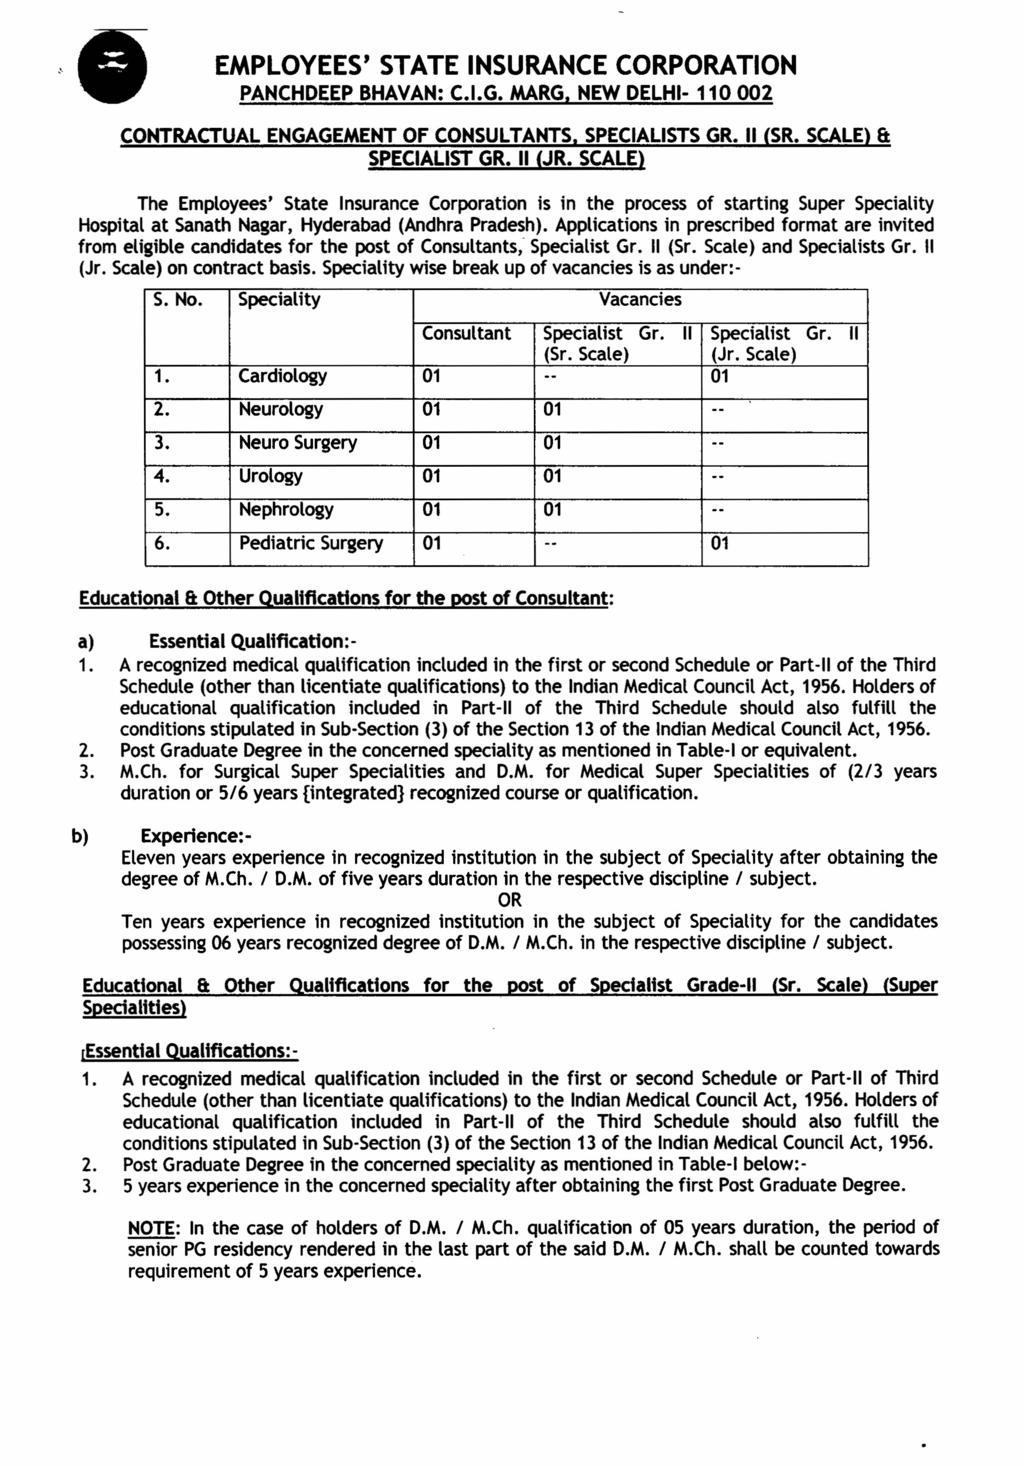 EMPLOYEES' CONTRACTUAL STATE INSURANCE CORPORATION PANCHDEEP BHAVAN: C.I.G. MARG. NEW DELHI- 110002 ENGAGEMENT OF CONSULTANTS. SPECIALISTS GR. 11 (SR. SCALE) & SPECIALIST GR. 11 (JR.